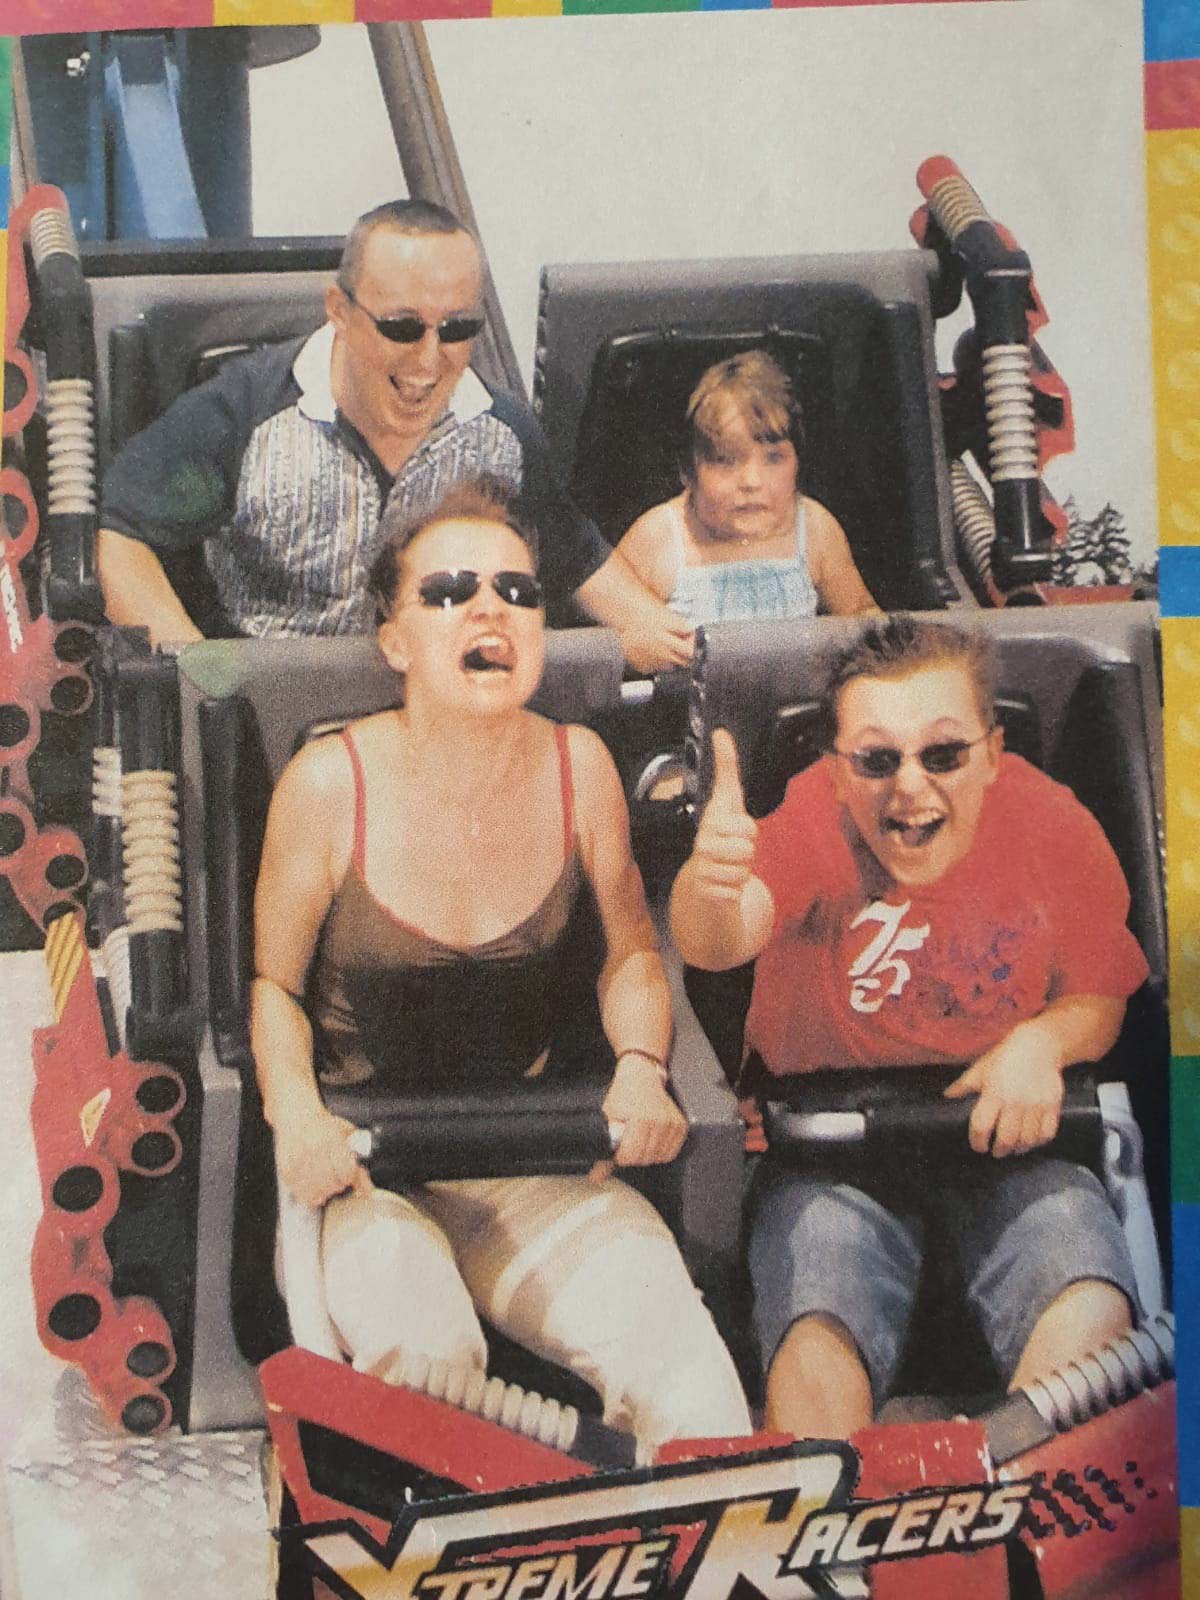 My family in Legoland in 2007, they seemed to enjoy the ride more than I did